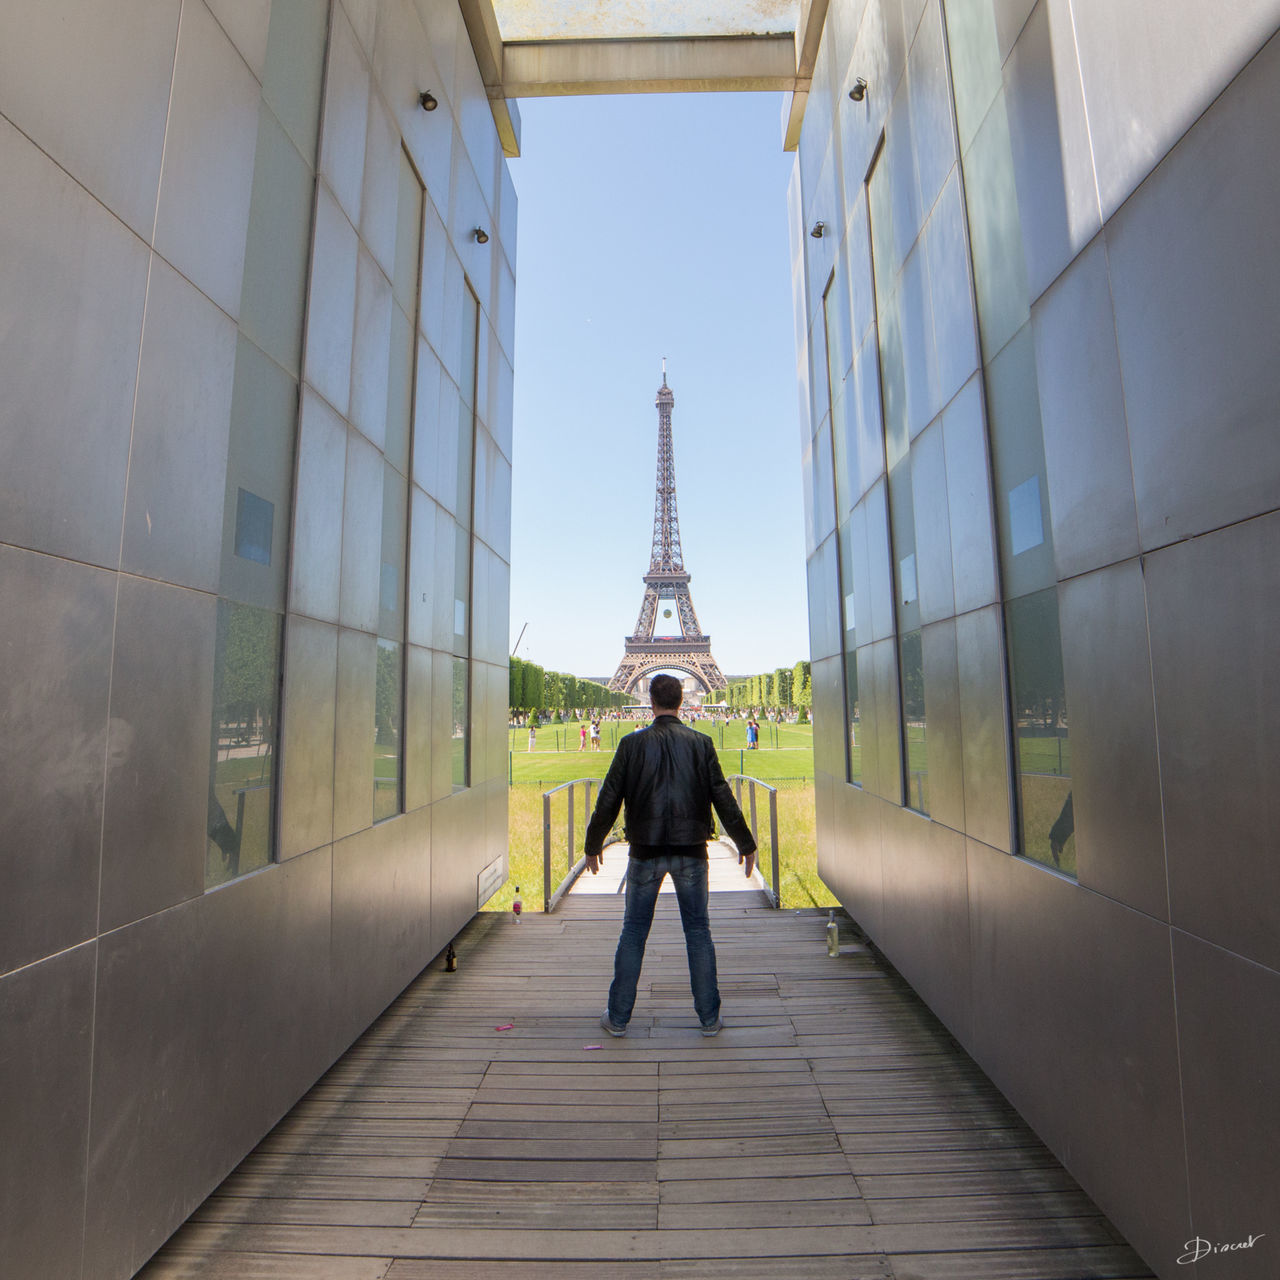 architecture, built structure, building exterior, rear view, walking, full length, lifestyles, city, men, tower, famous place, travel destinations, tall - high, international landmark, tourism, travel, the way forward, capital cities